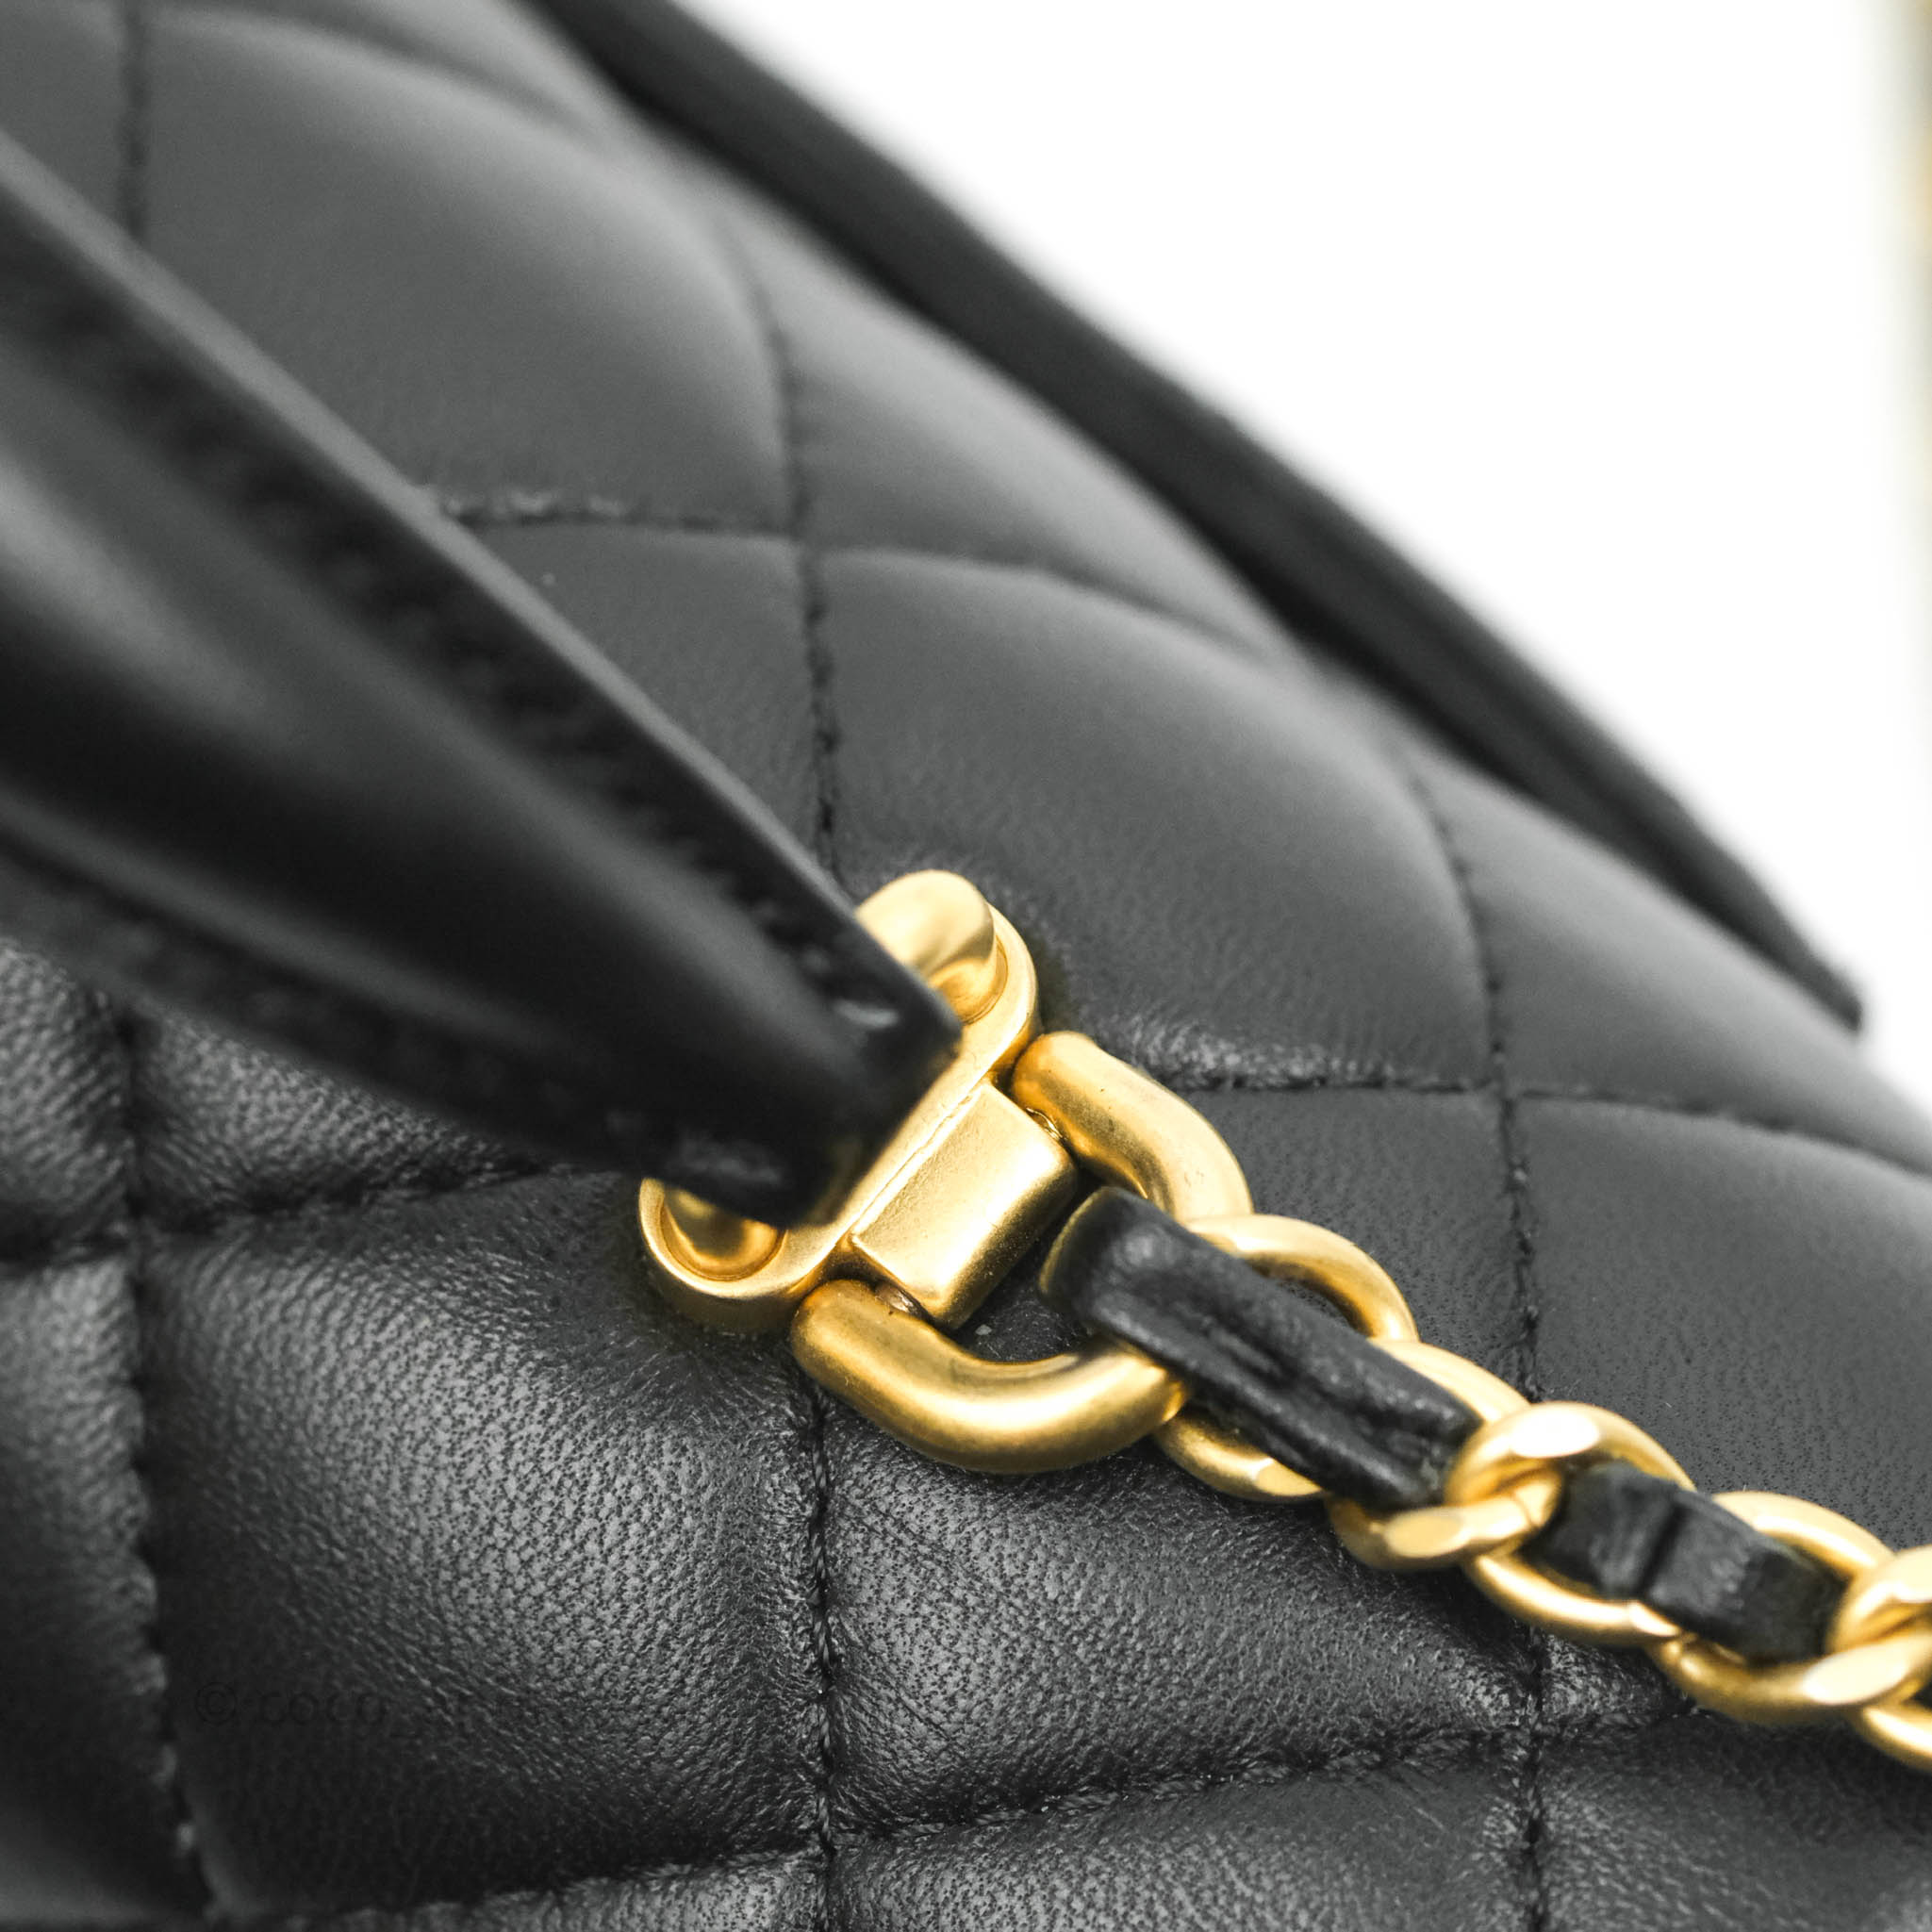 Chanel Black Quilted Lambskin Small Chic Pearls Gold Hardware